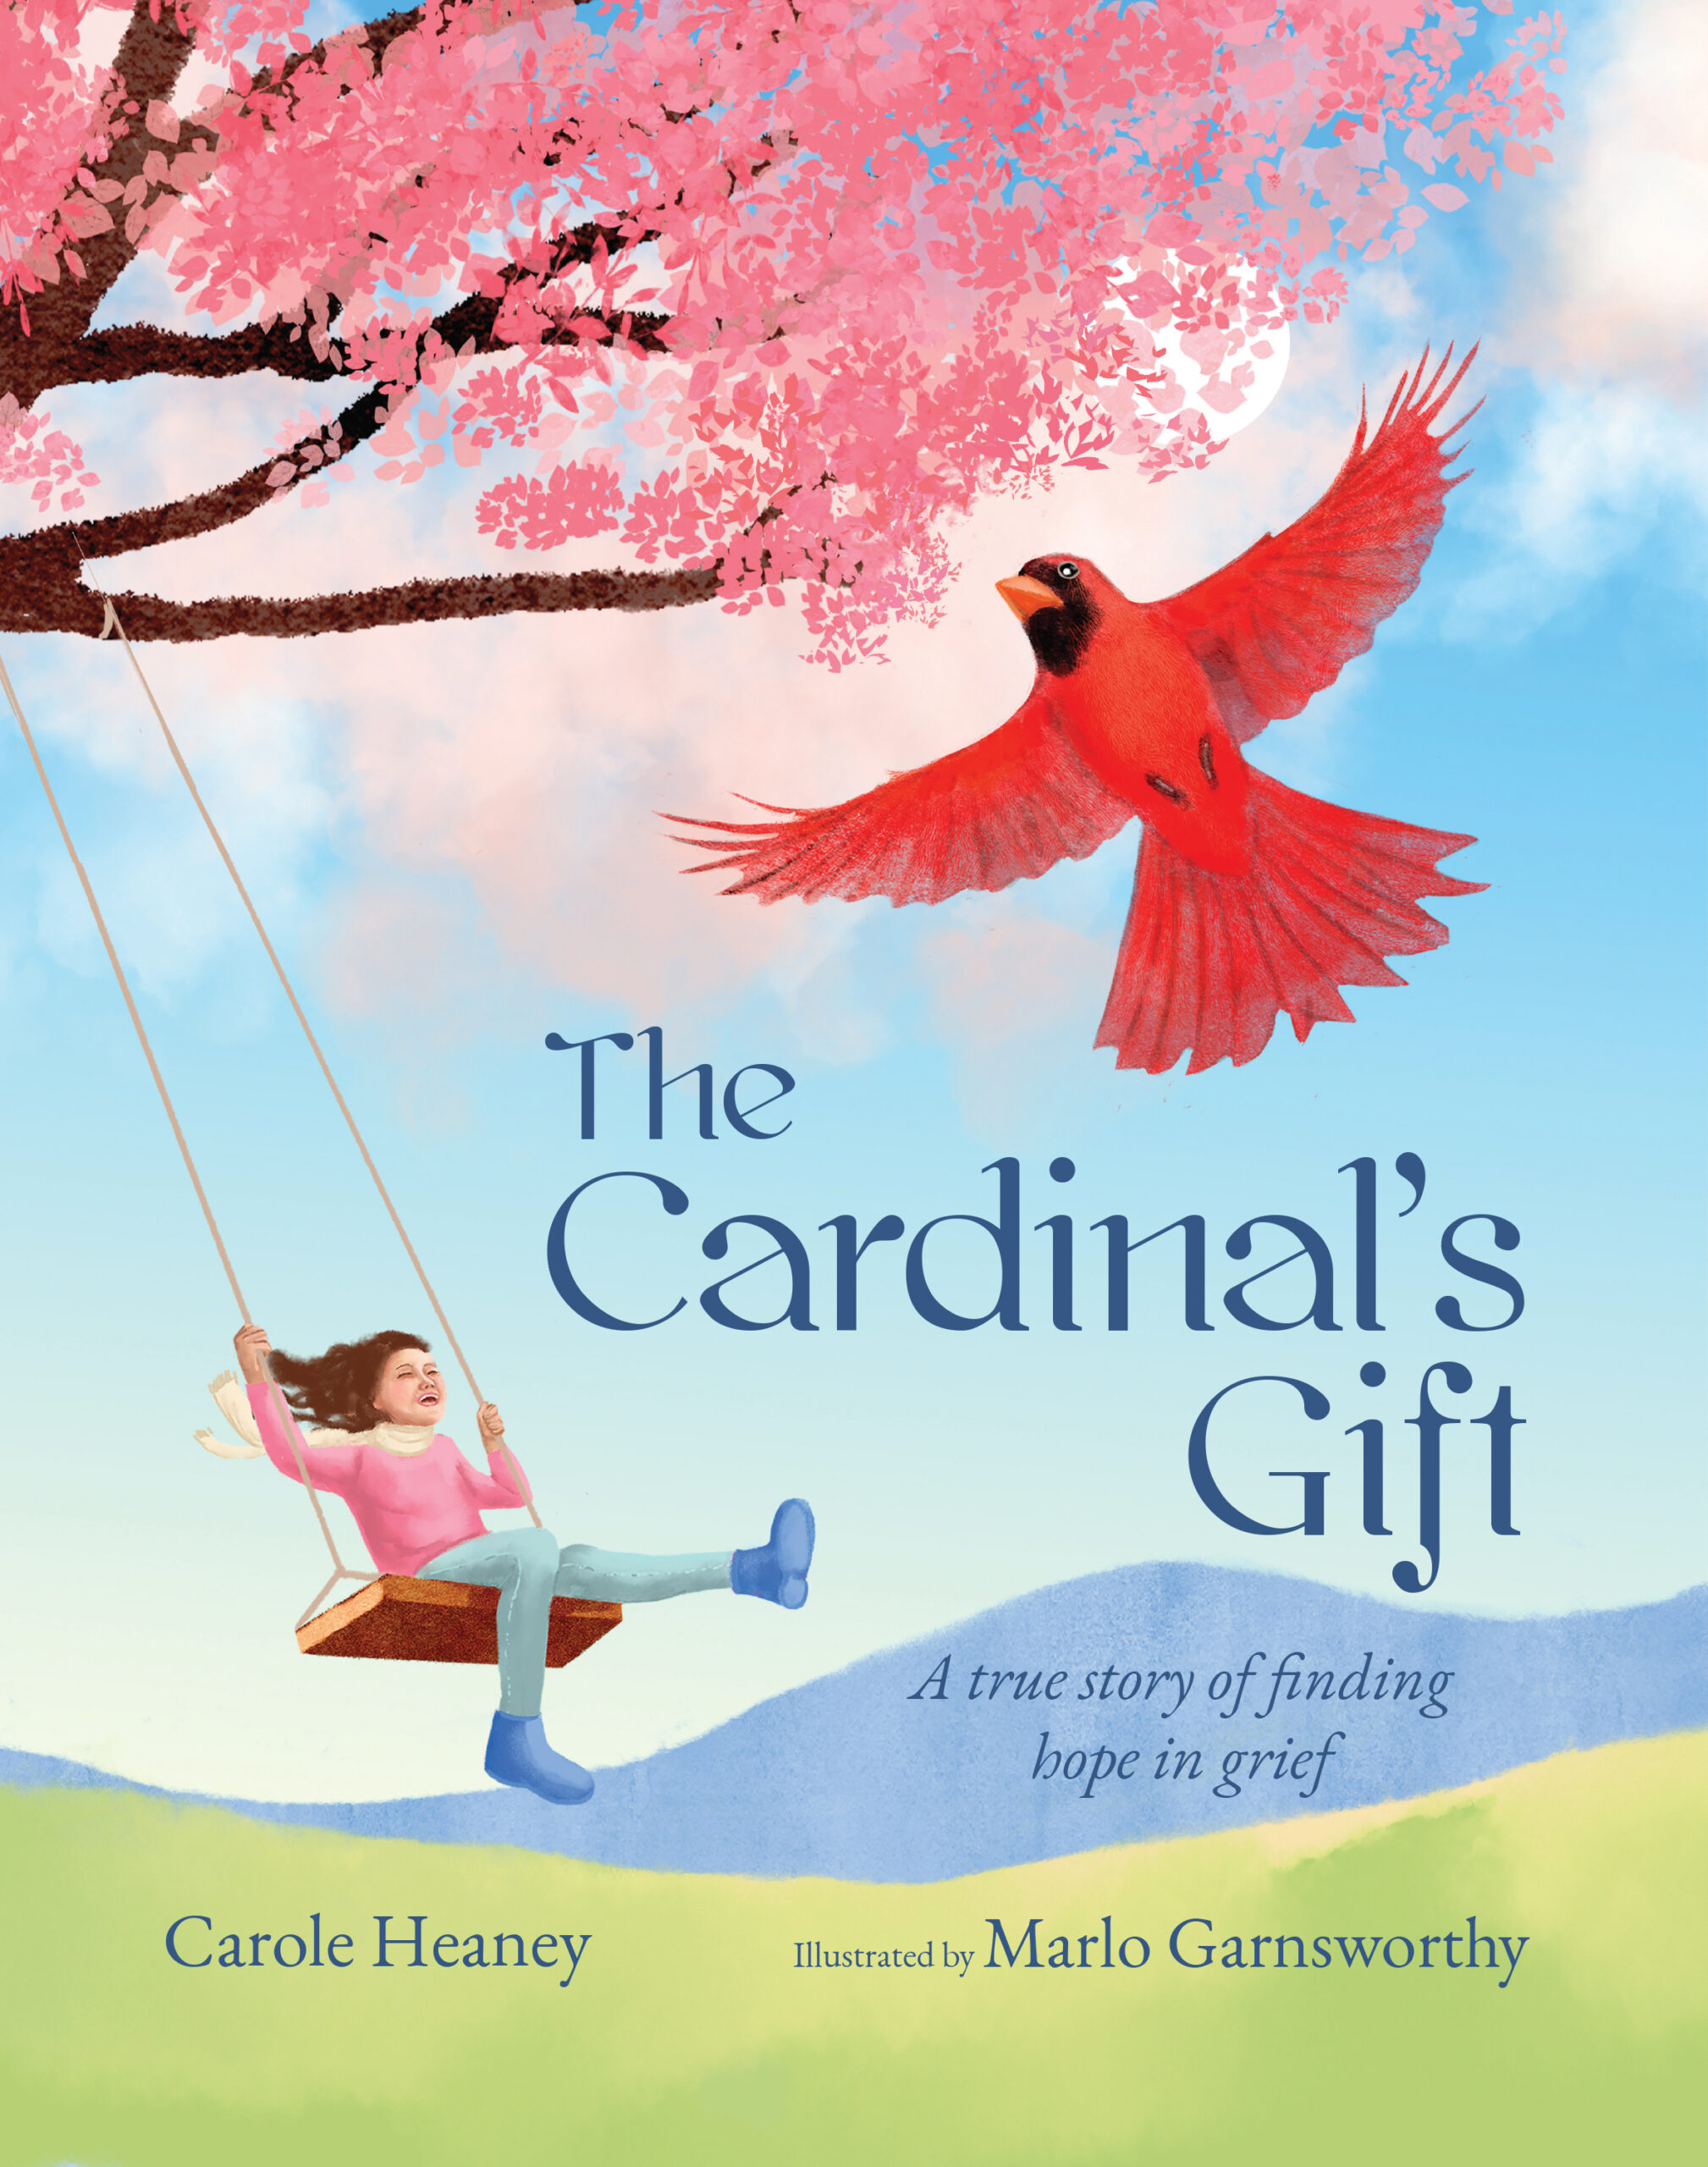 FREE: The Cardinal’s Gift-A True Story of Finding Hope in Grief by Carole Heaney